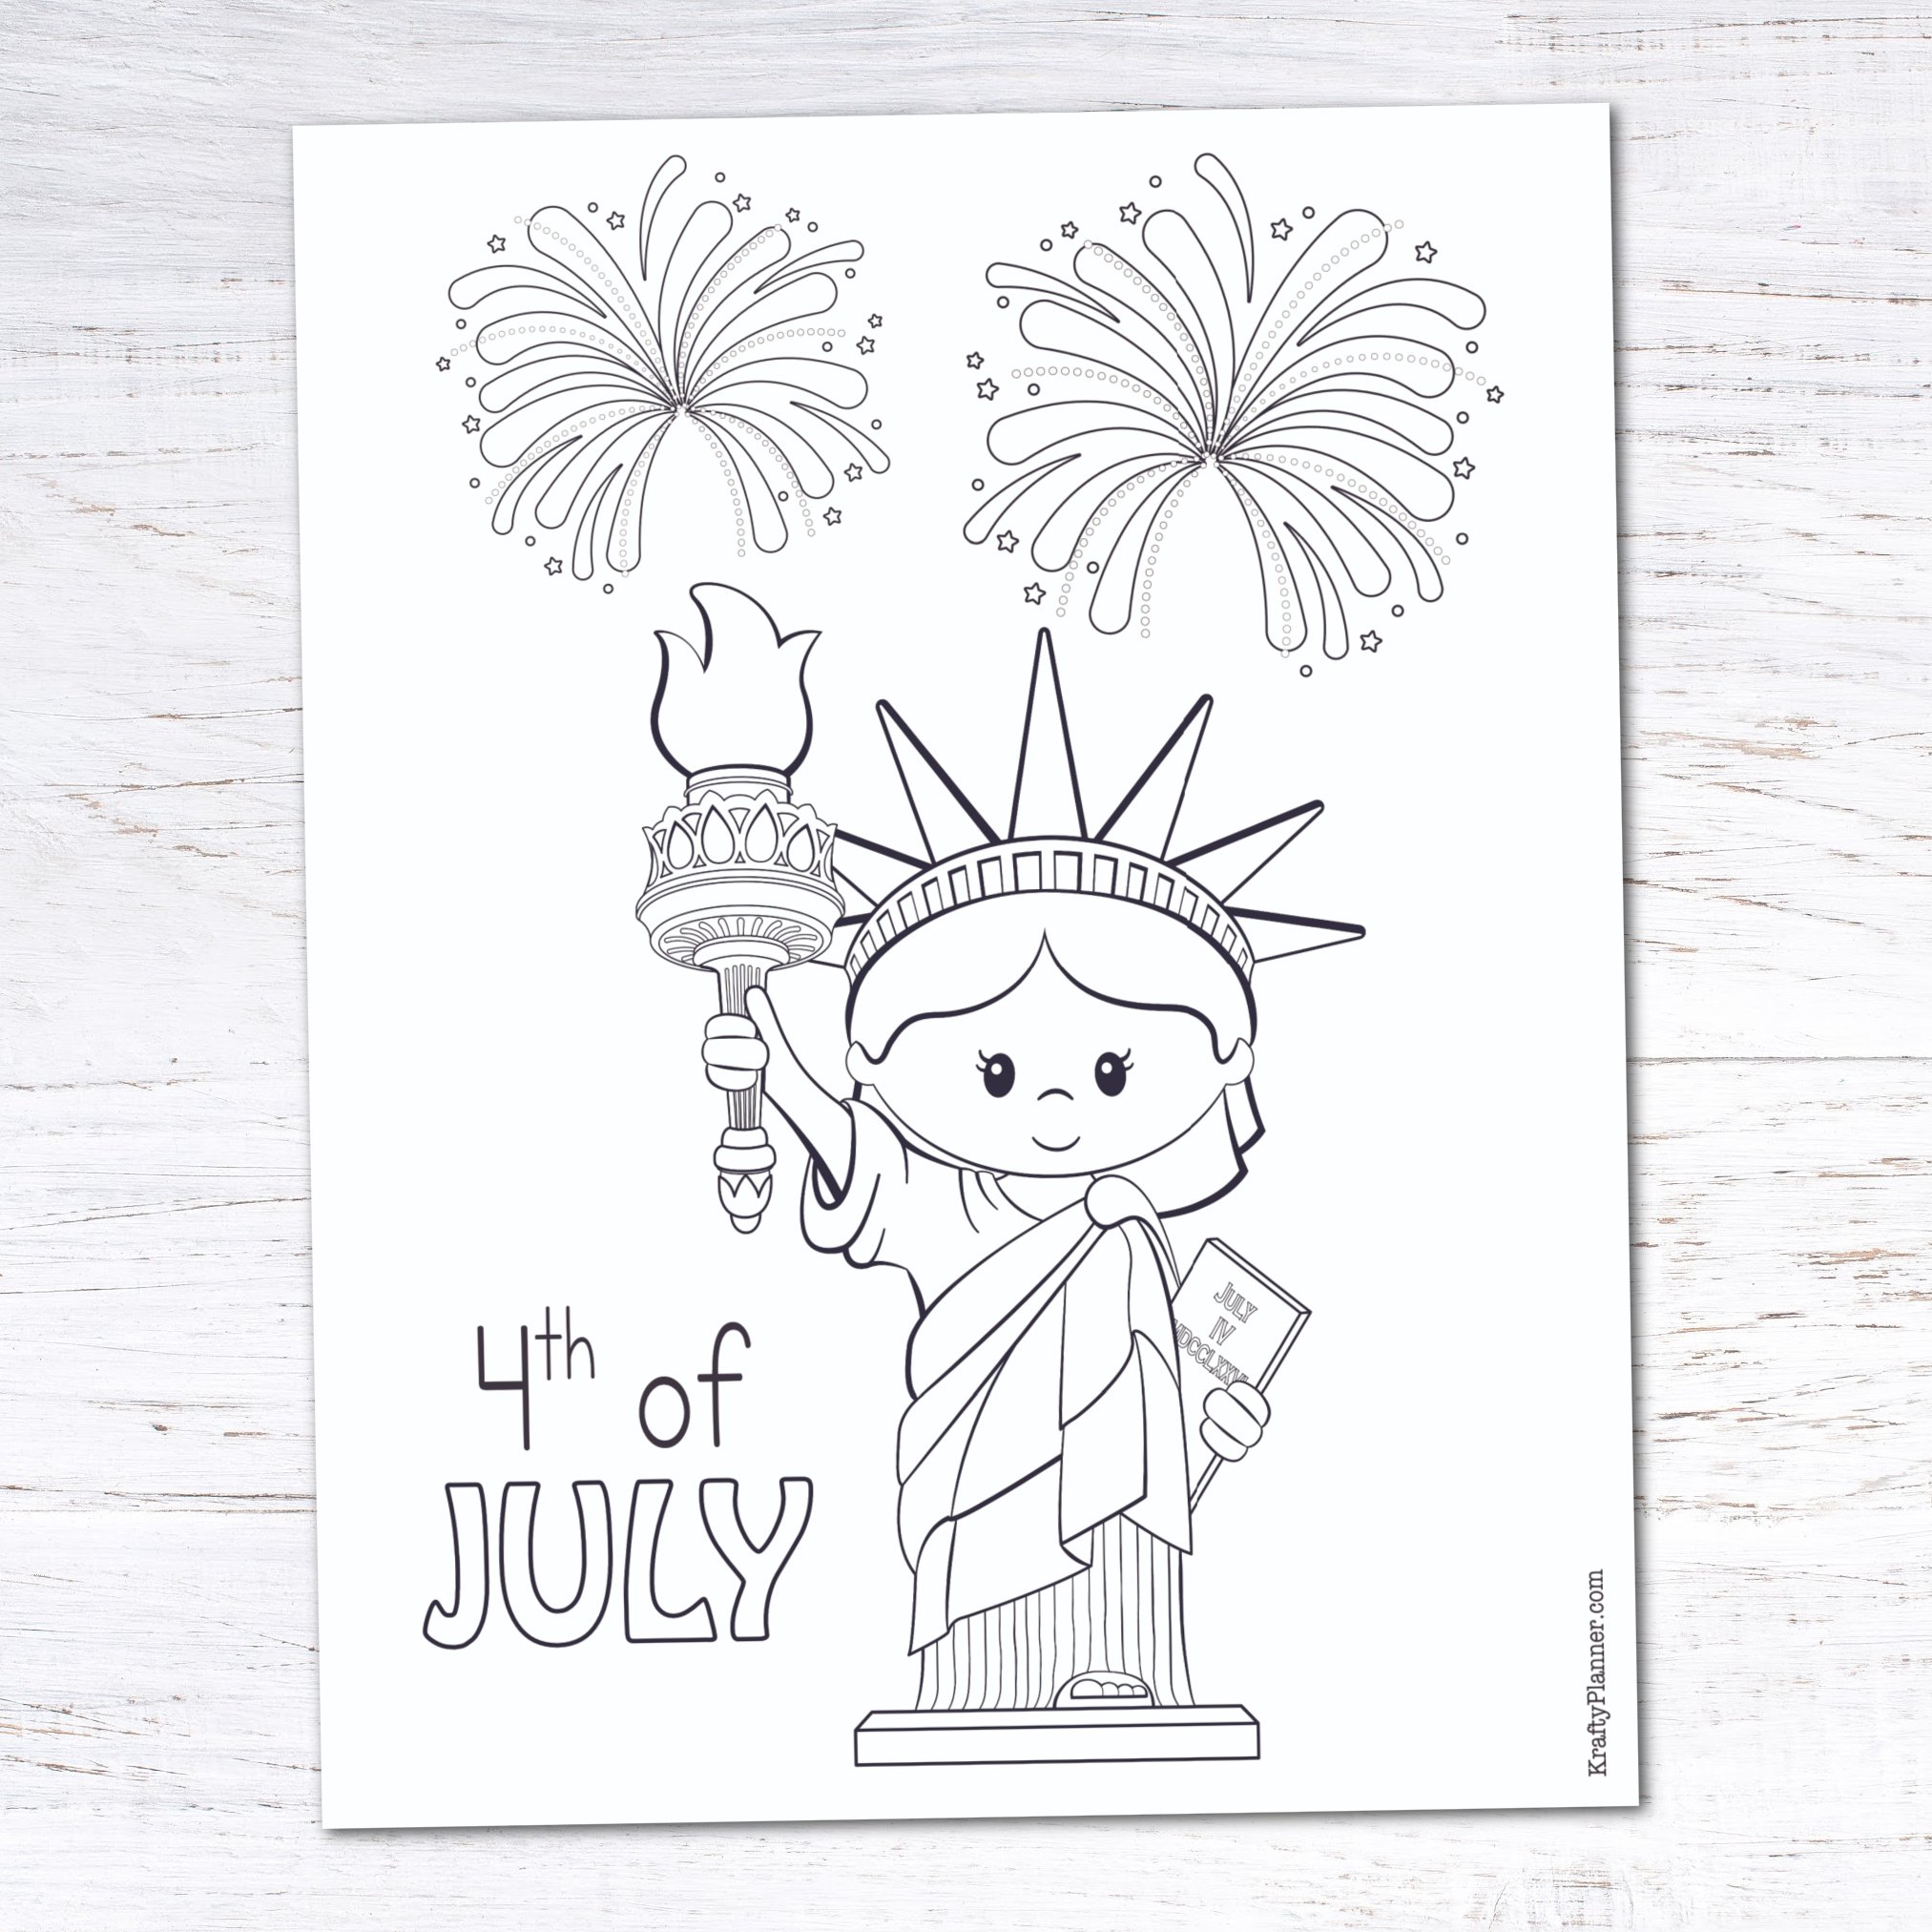 Free Printable 4th of July Coloring Pages - Lady Liberty.jpg